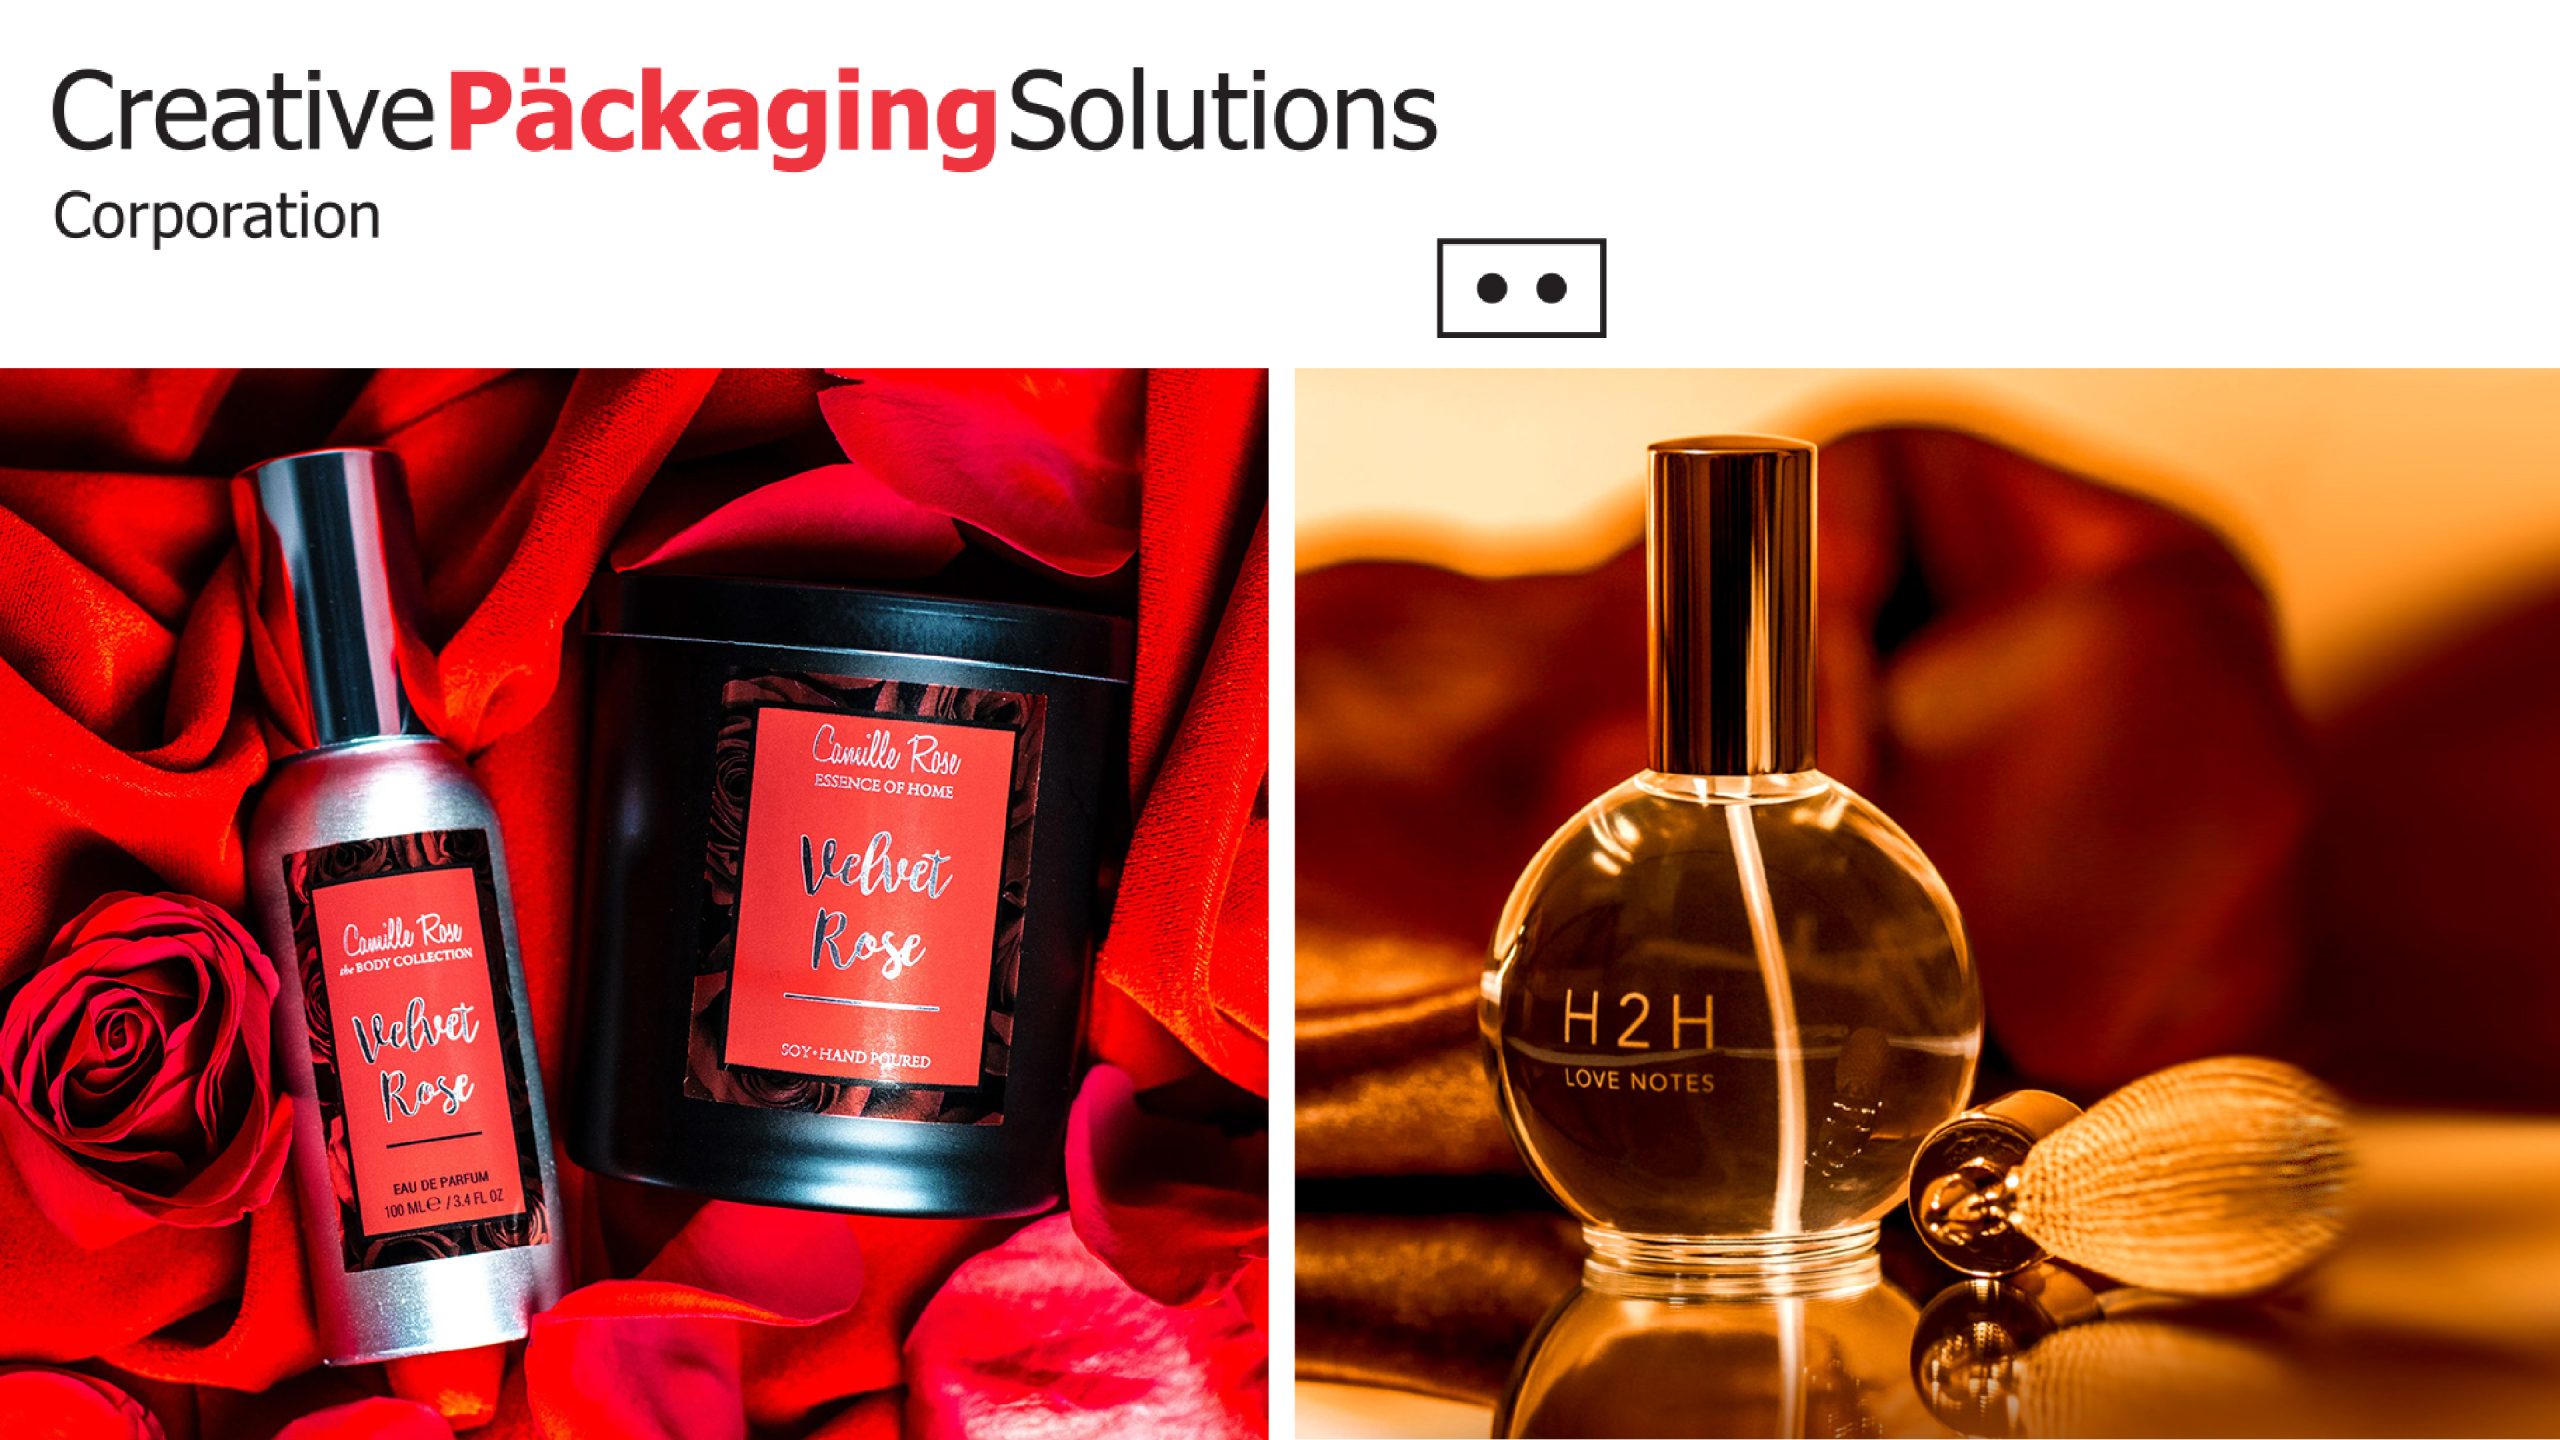 Creative Packaging Solutions Corporation